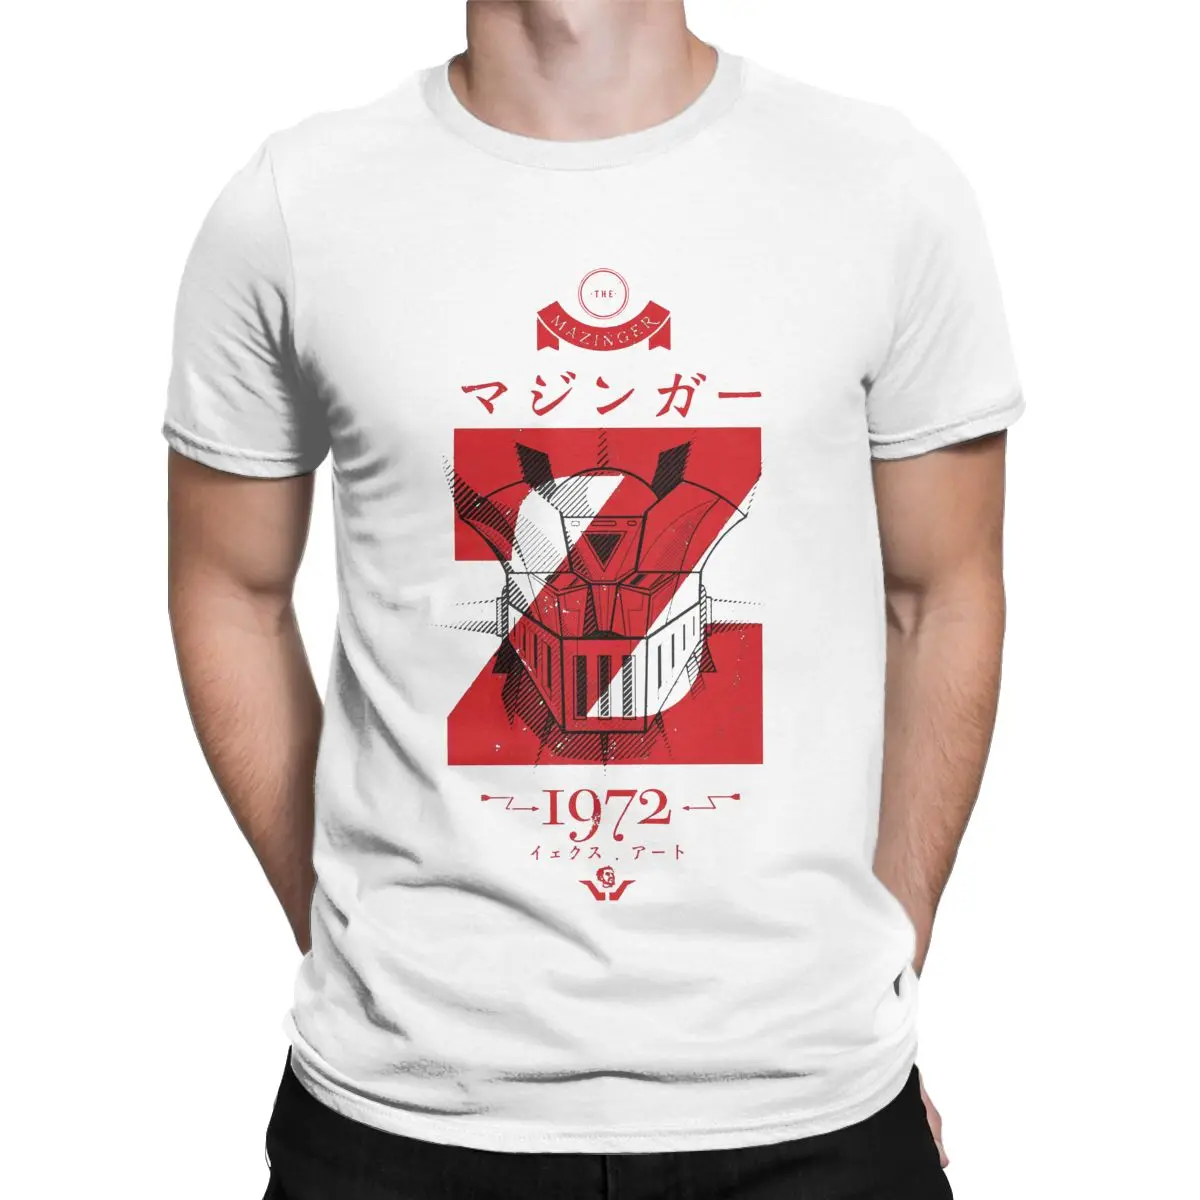 

Mazinger Z Vintage Classic T Shirt Men's clothing 70s anime Tees Short Sleeve Round Neck T-Shirts Pure Cotton Party Clothing